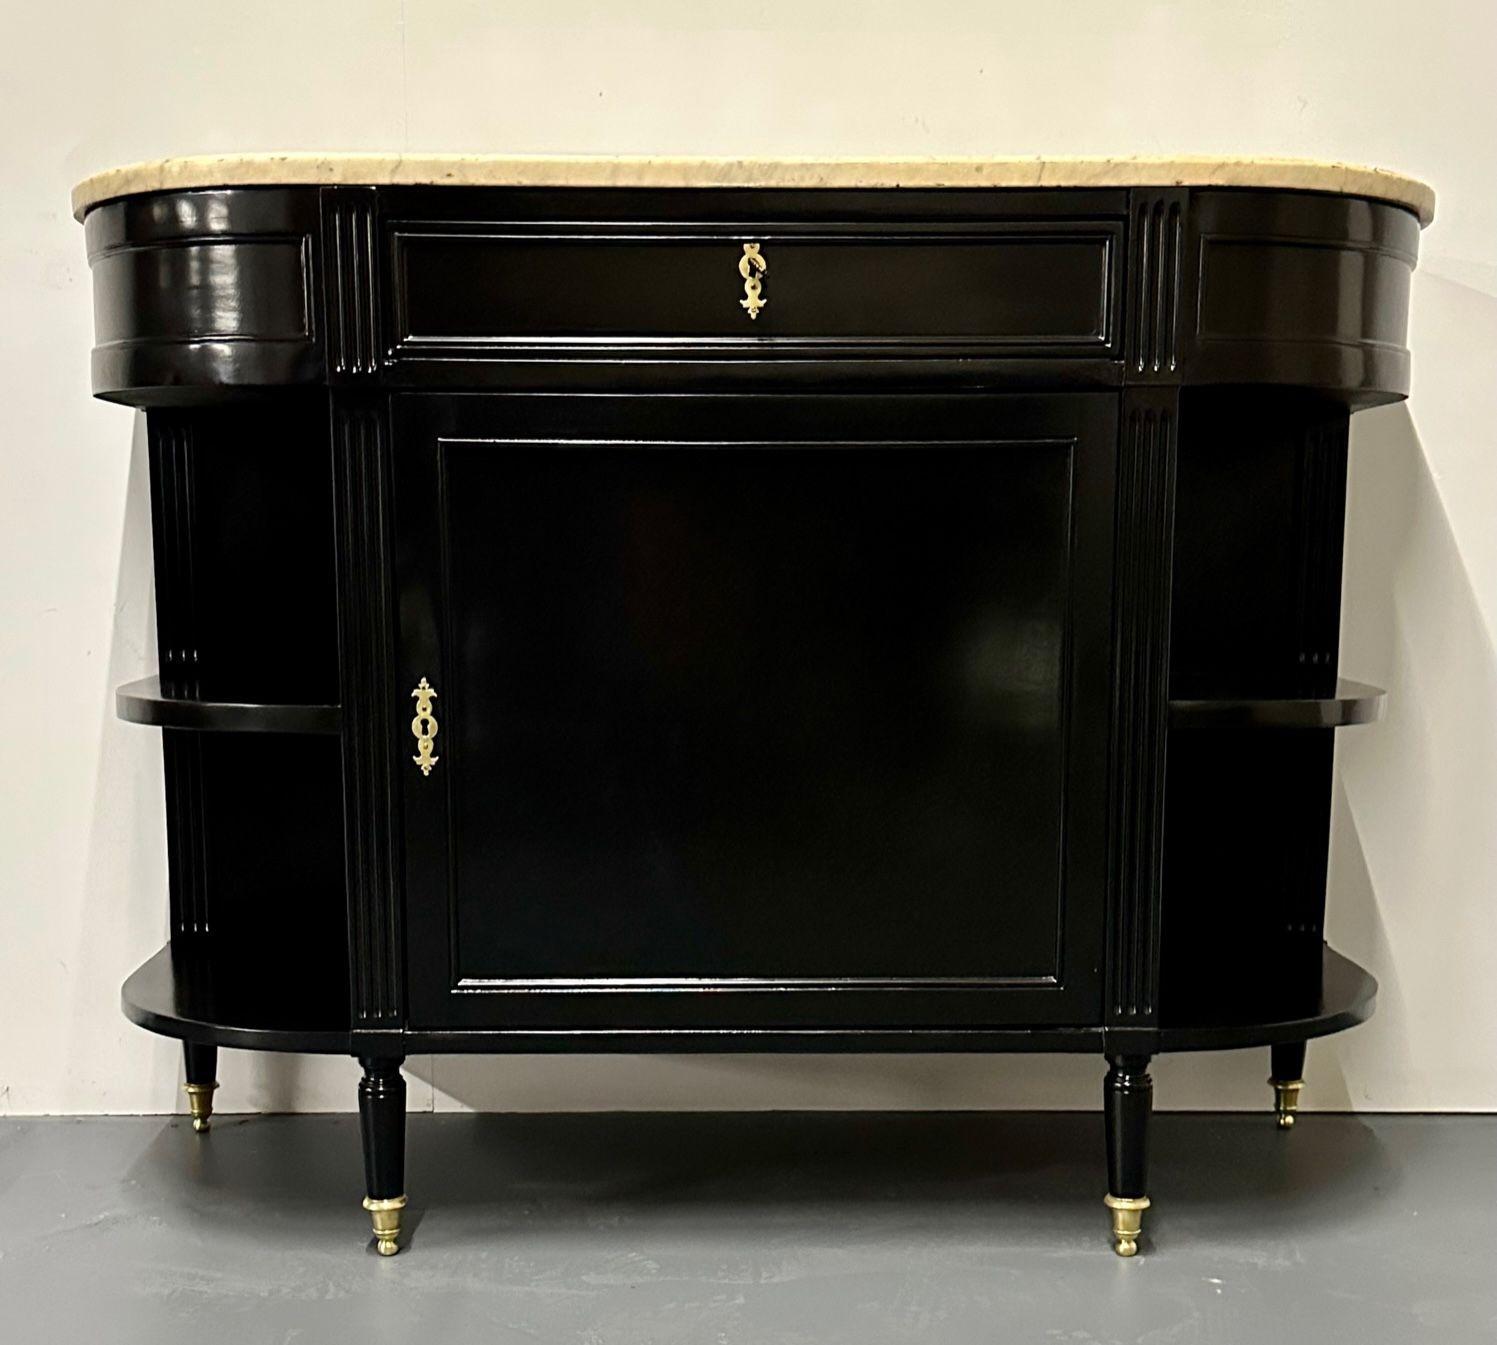 Hollywood Regency Ebony Demilune Server, Console, Serving Table, French, 19th Century
A French marble top demilune console or sideboard. This stunning 19th century server has a thick white gray veined marble top supported by a group of three drawers